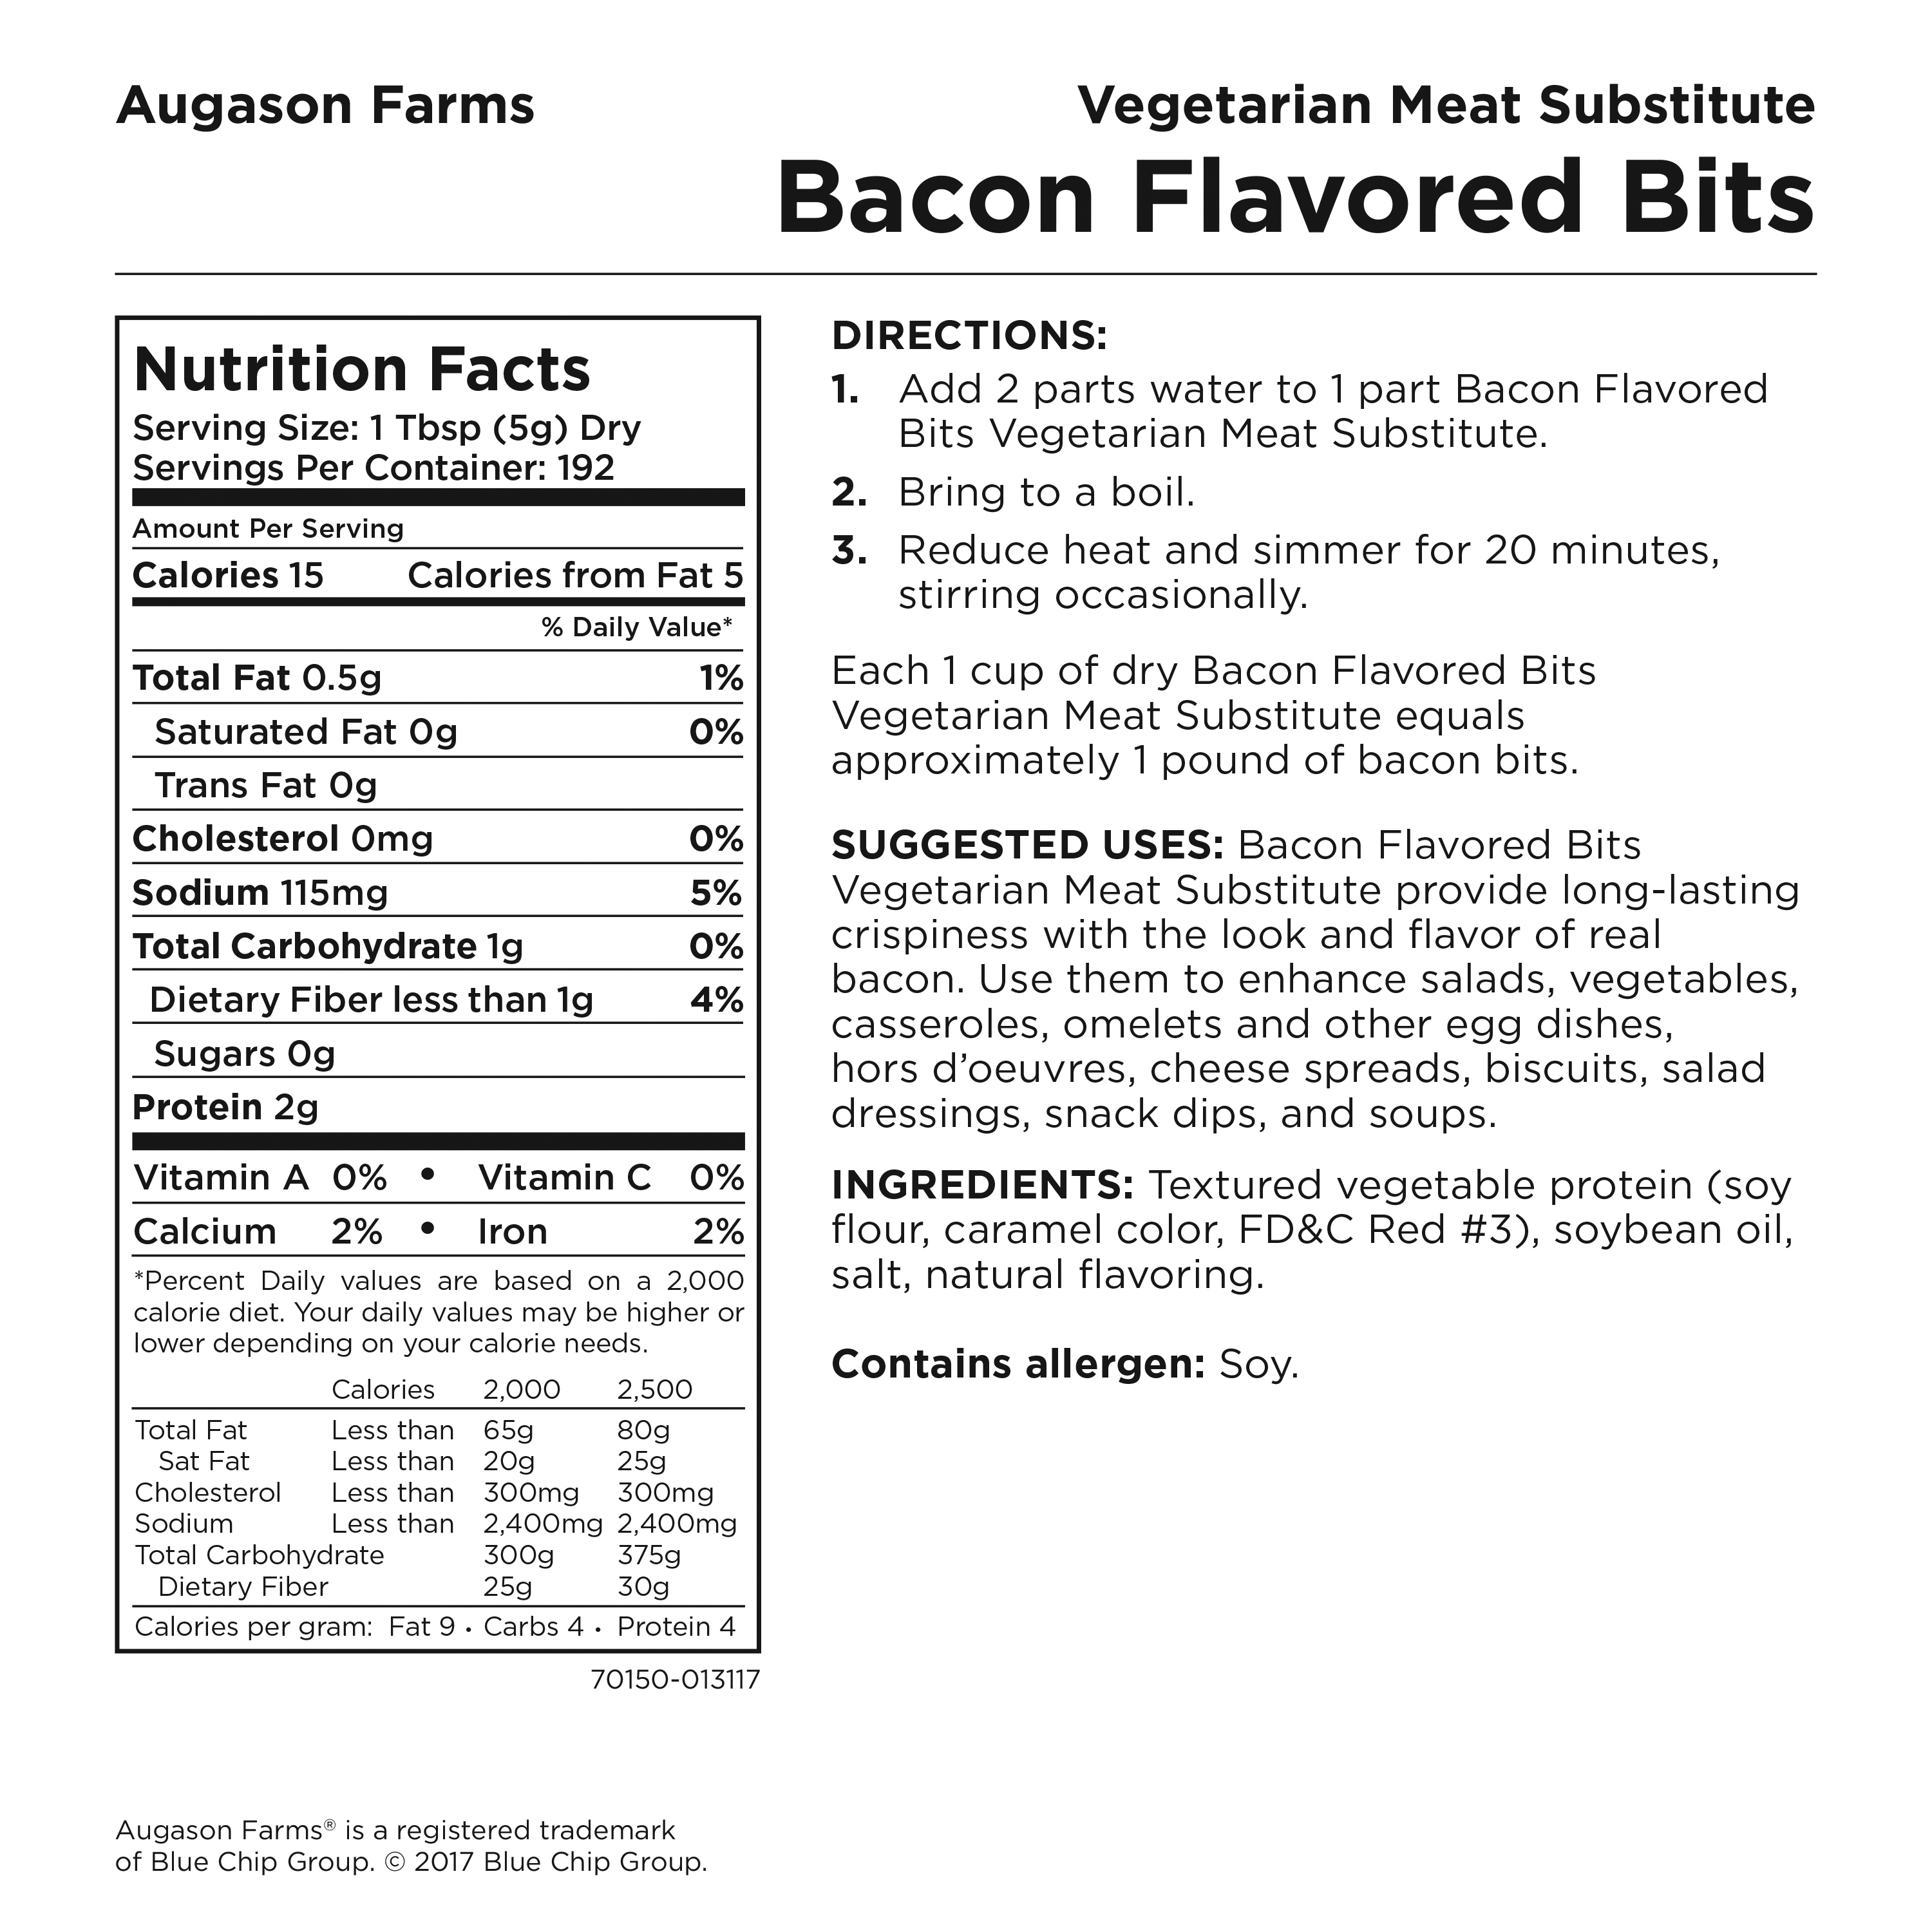 Augason Farms Bacon Flavored Bits Vegetarian Meat Substitute 2 lbs 2 oz No. 10 Can - image 3 of 9